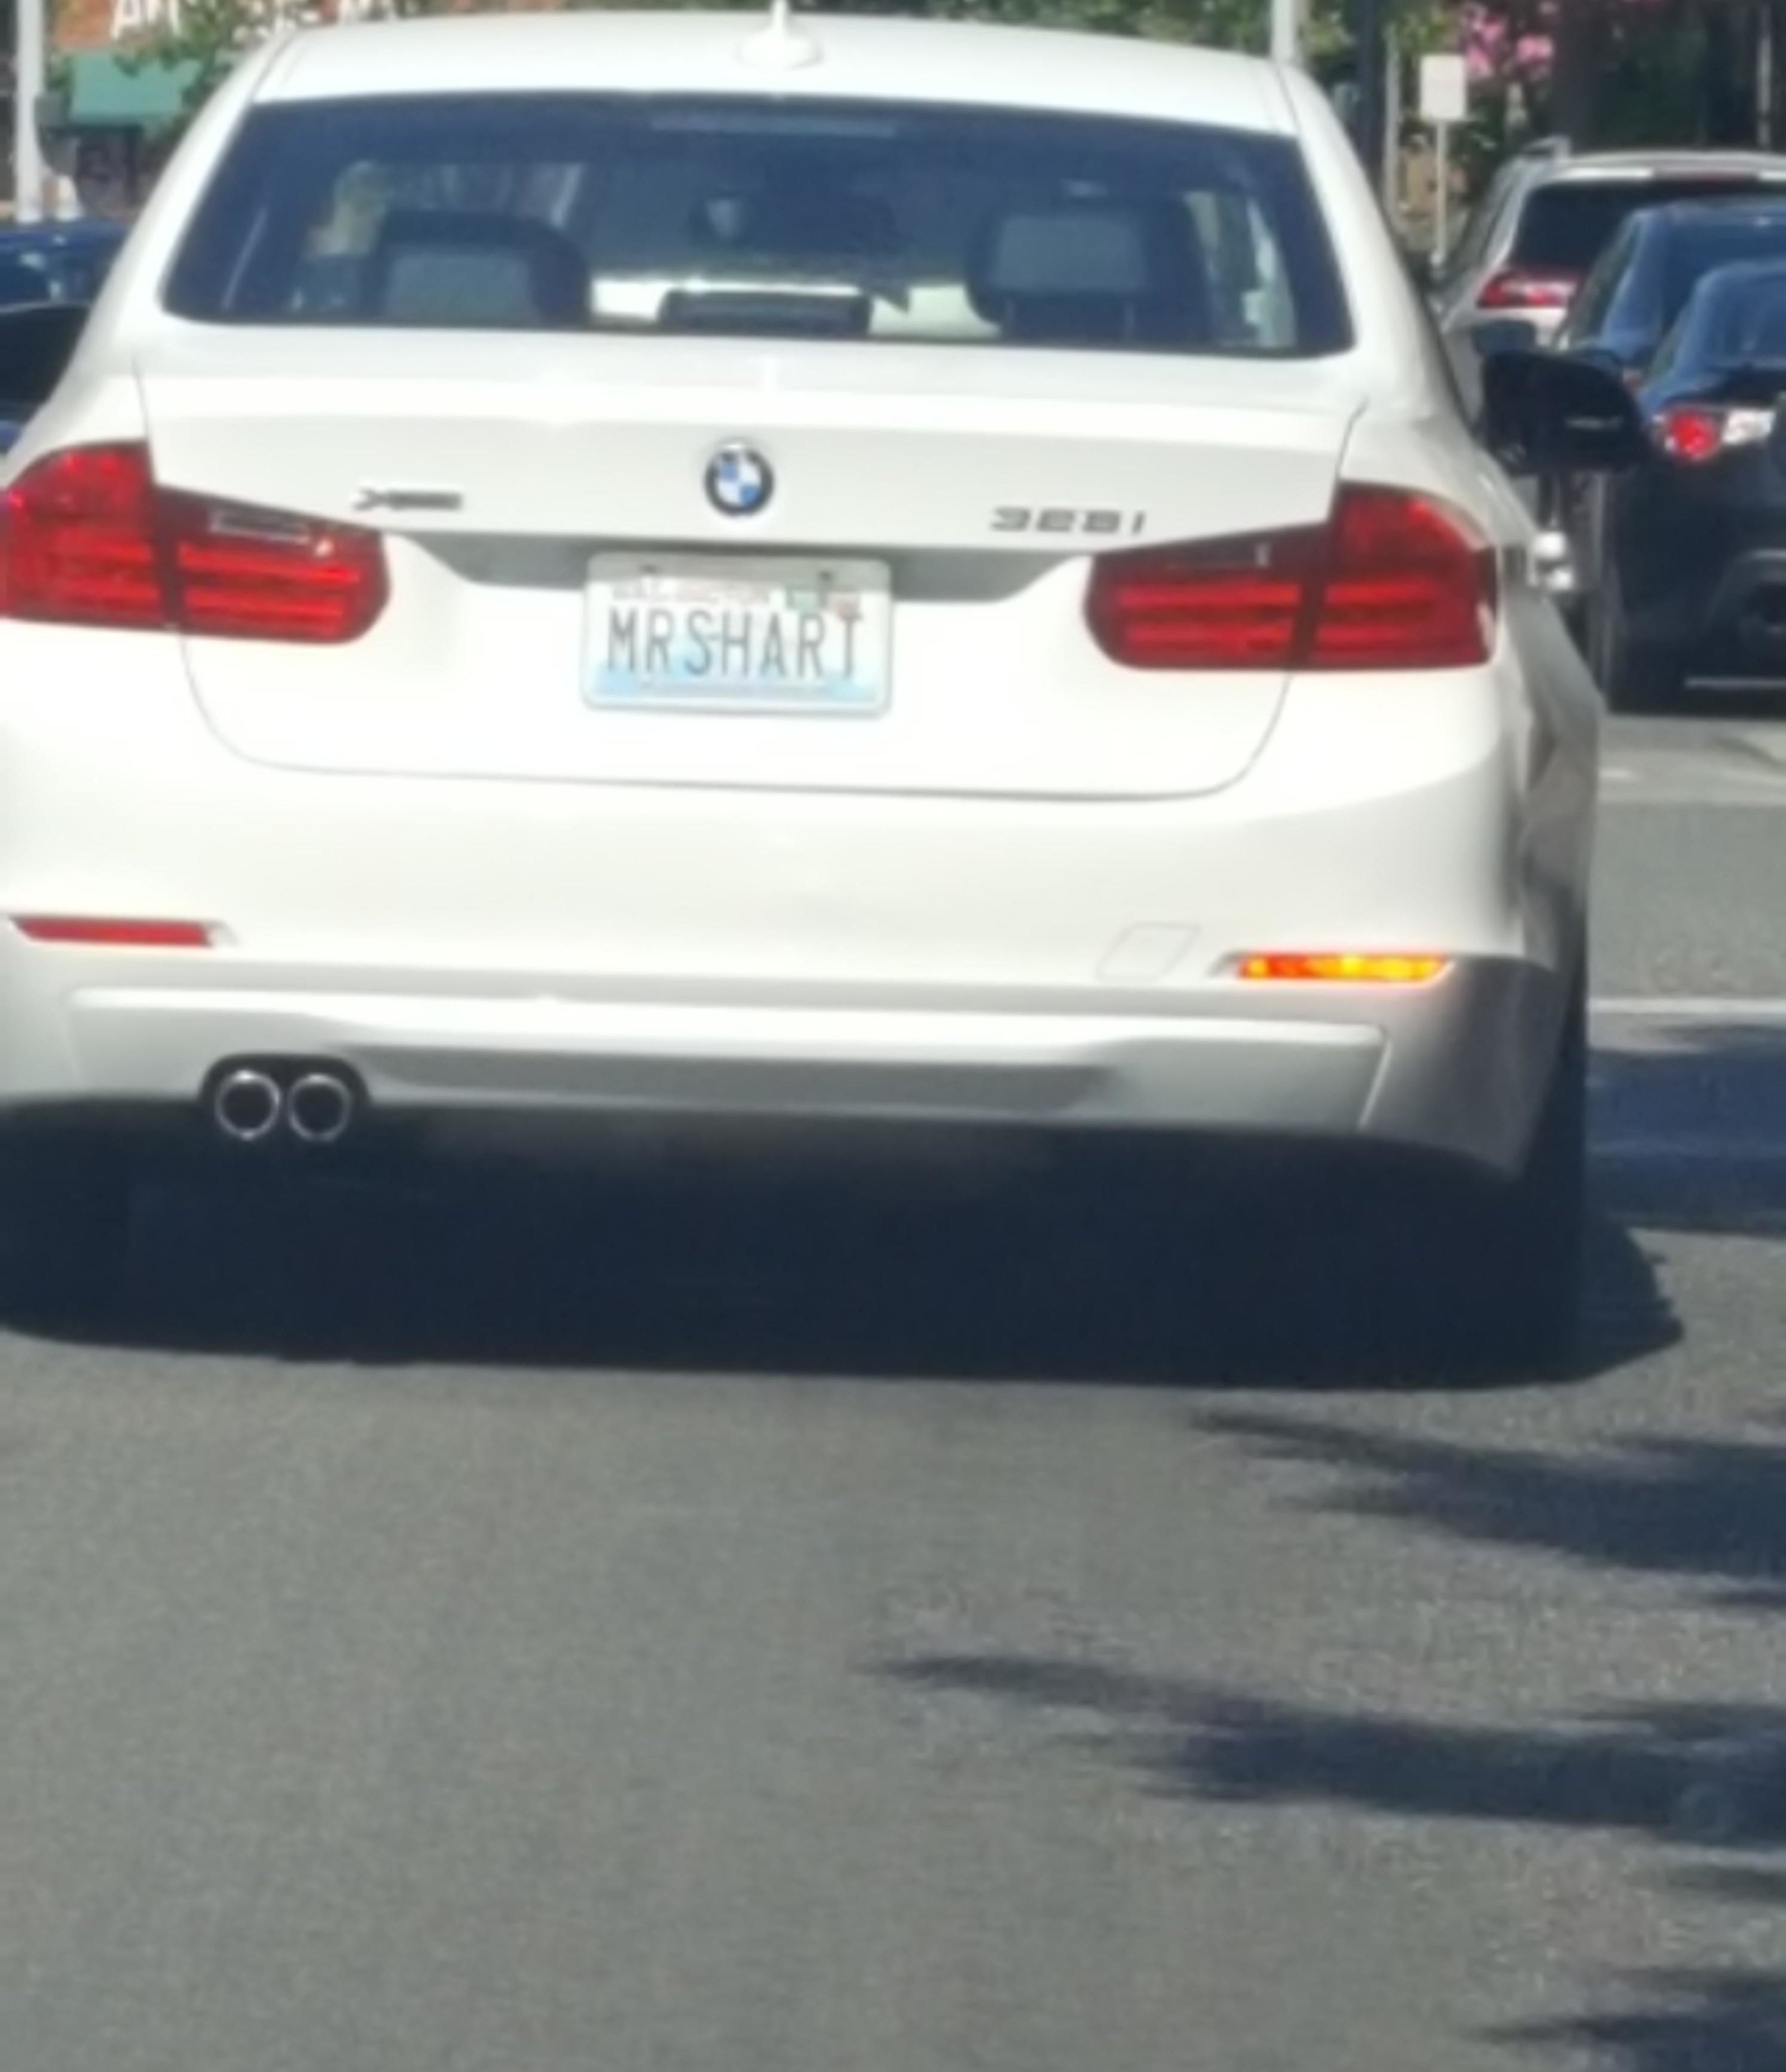 Car with license plate reading &quot;MRSHART&quot;